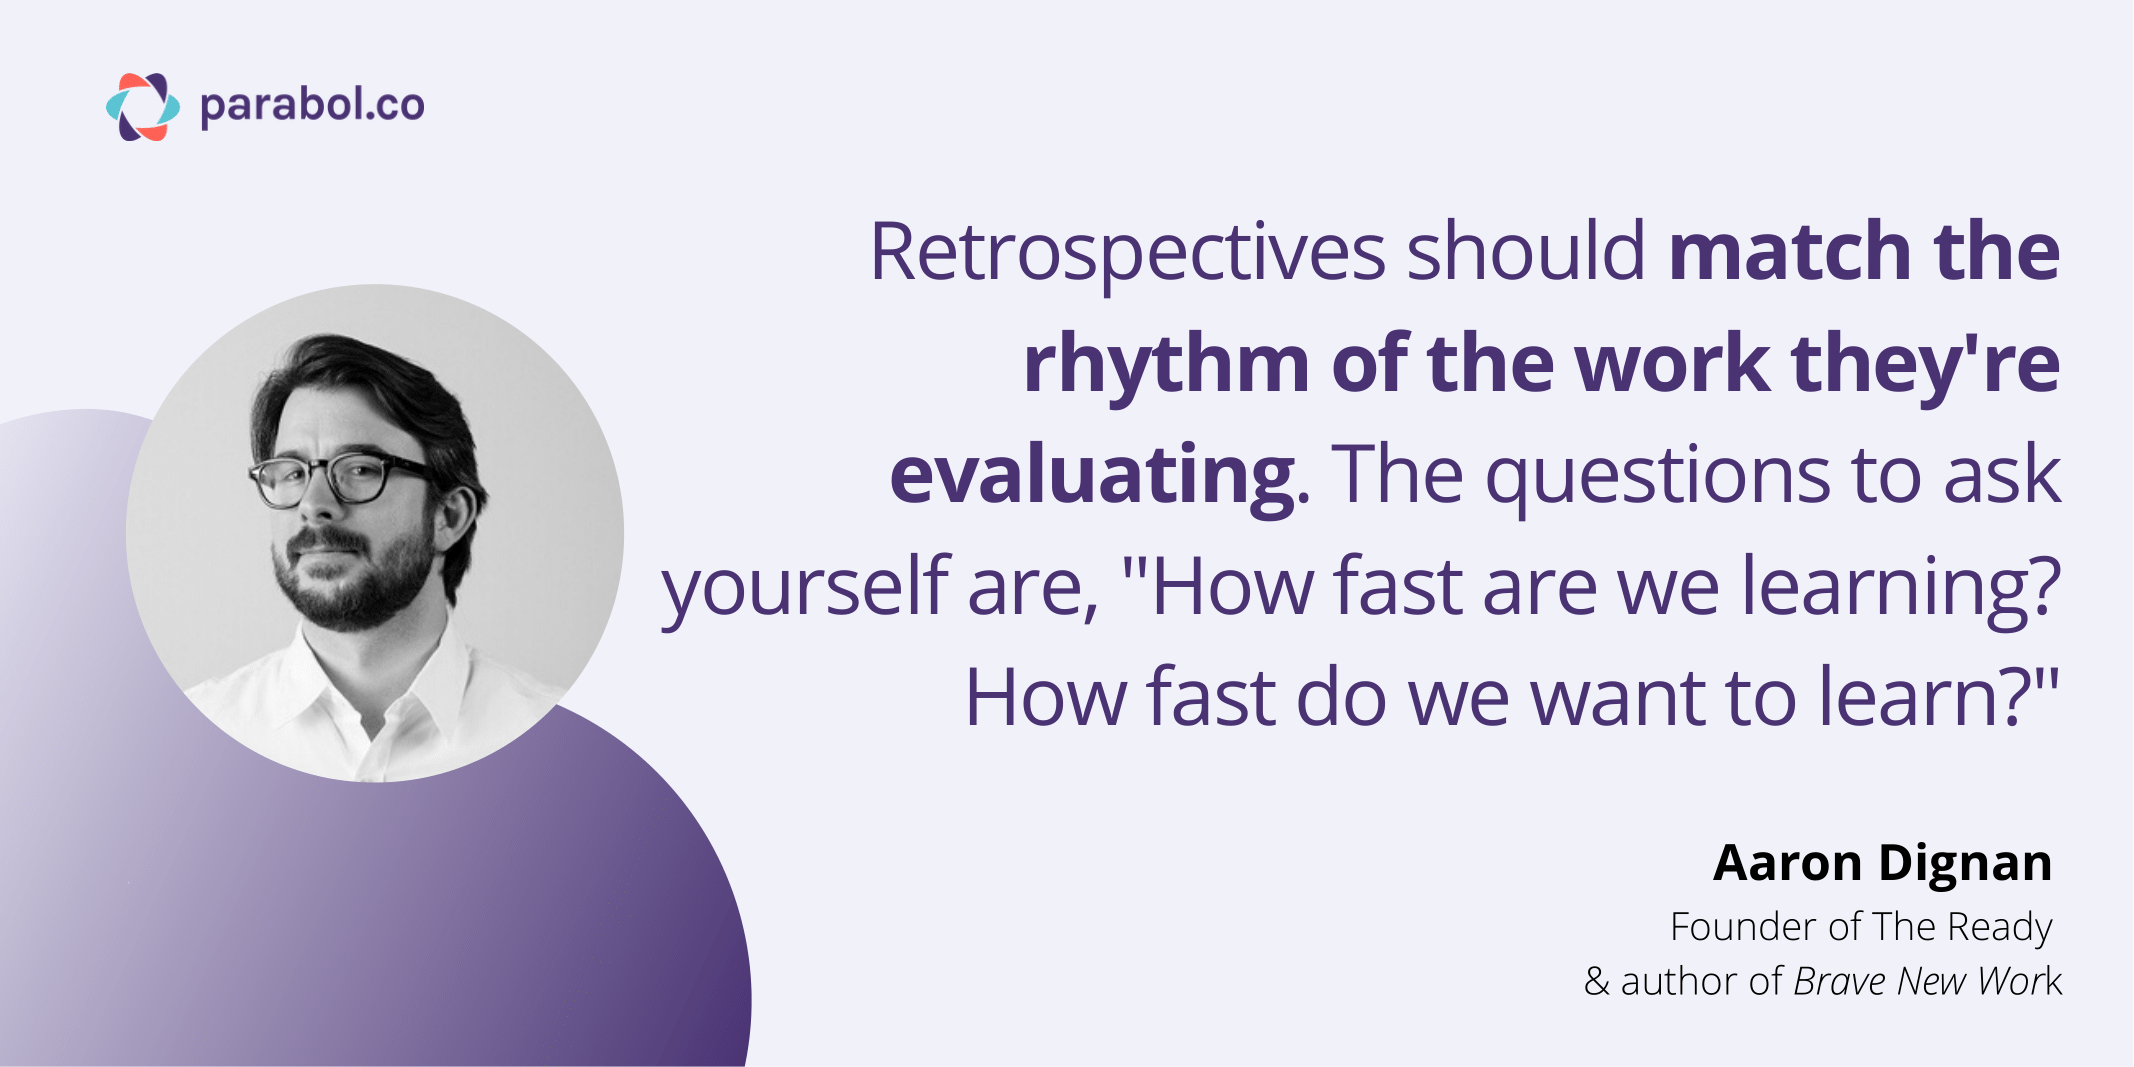 Retrospectives should match the rhythm of the work they're evaluating, according to Aaron Dignan